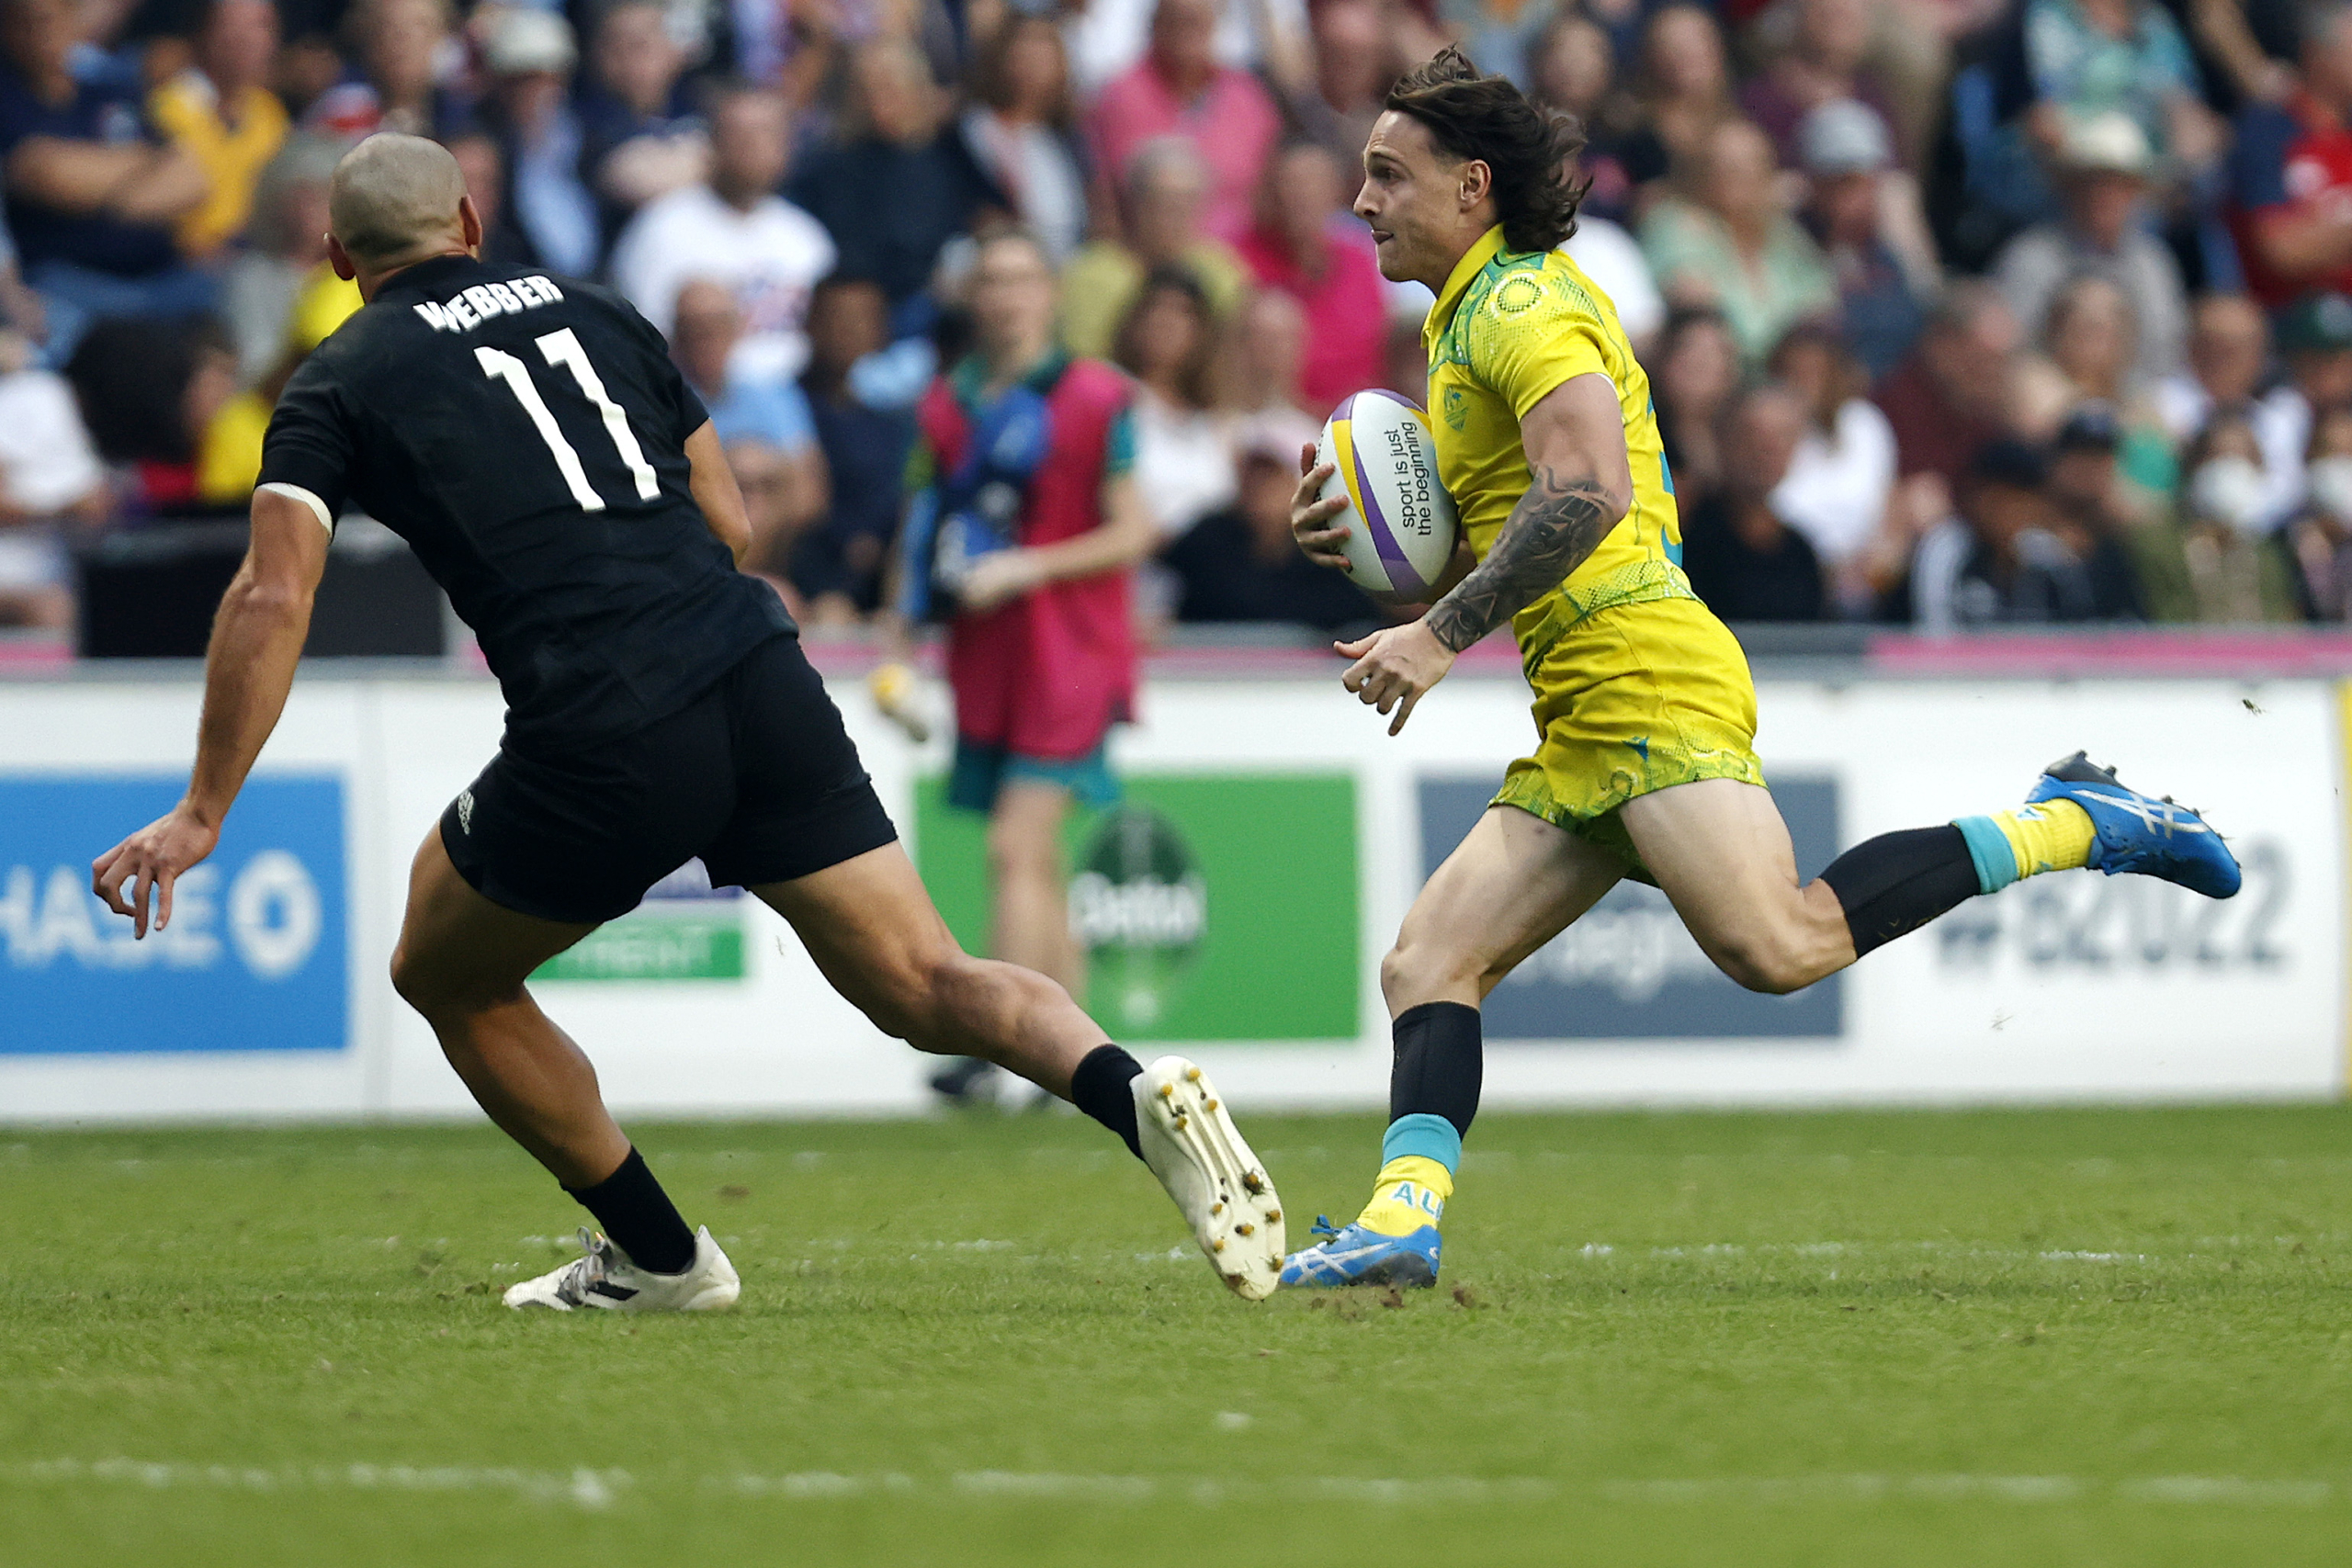 Kiwis relegate Mens Rugby 7s to Games fourth Commonwealth Games Australia